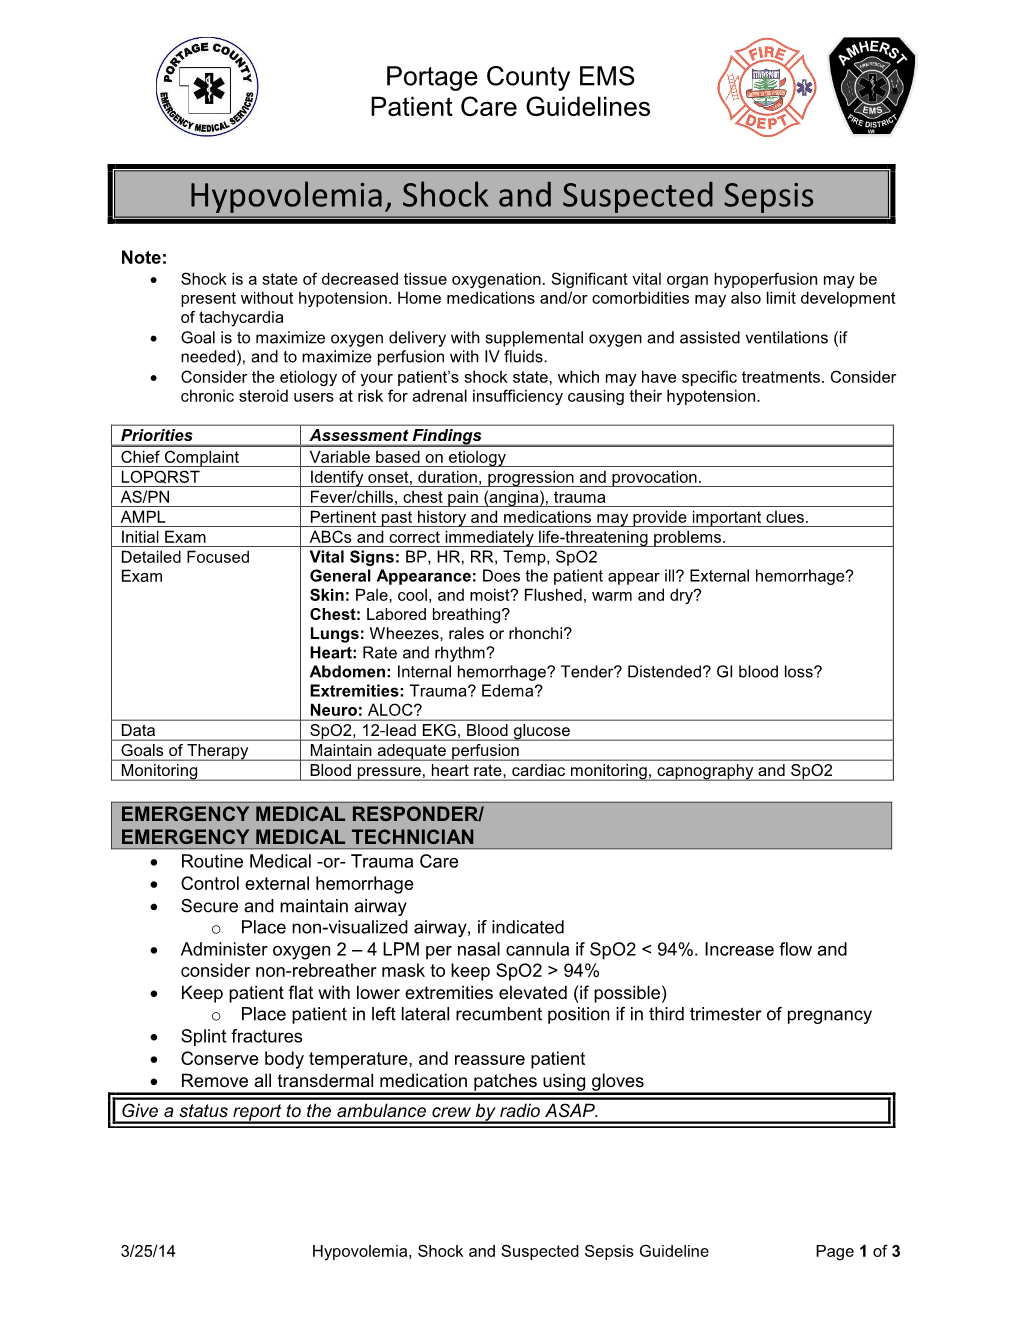 Hypovolemia, Shock and Suspected Sepsis